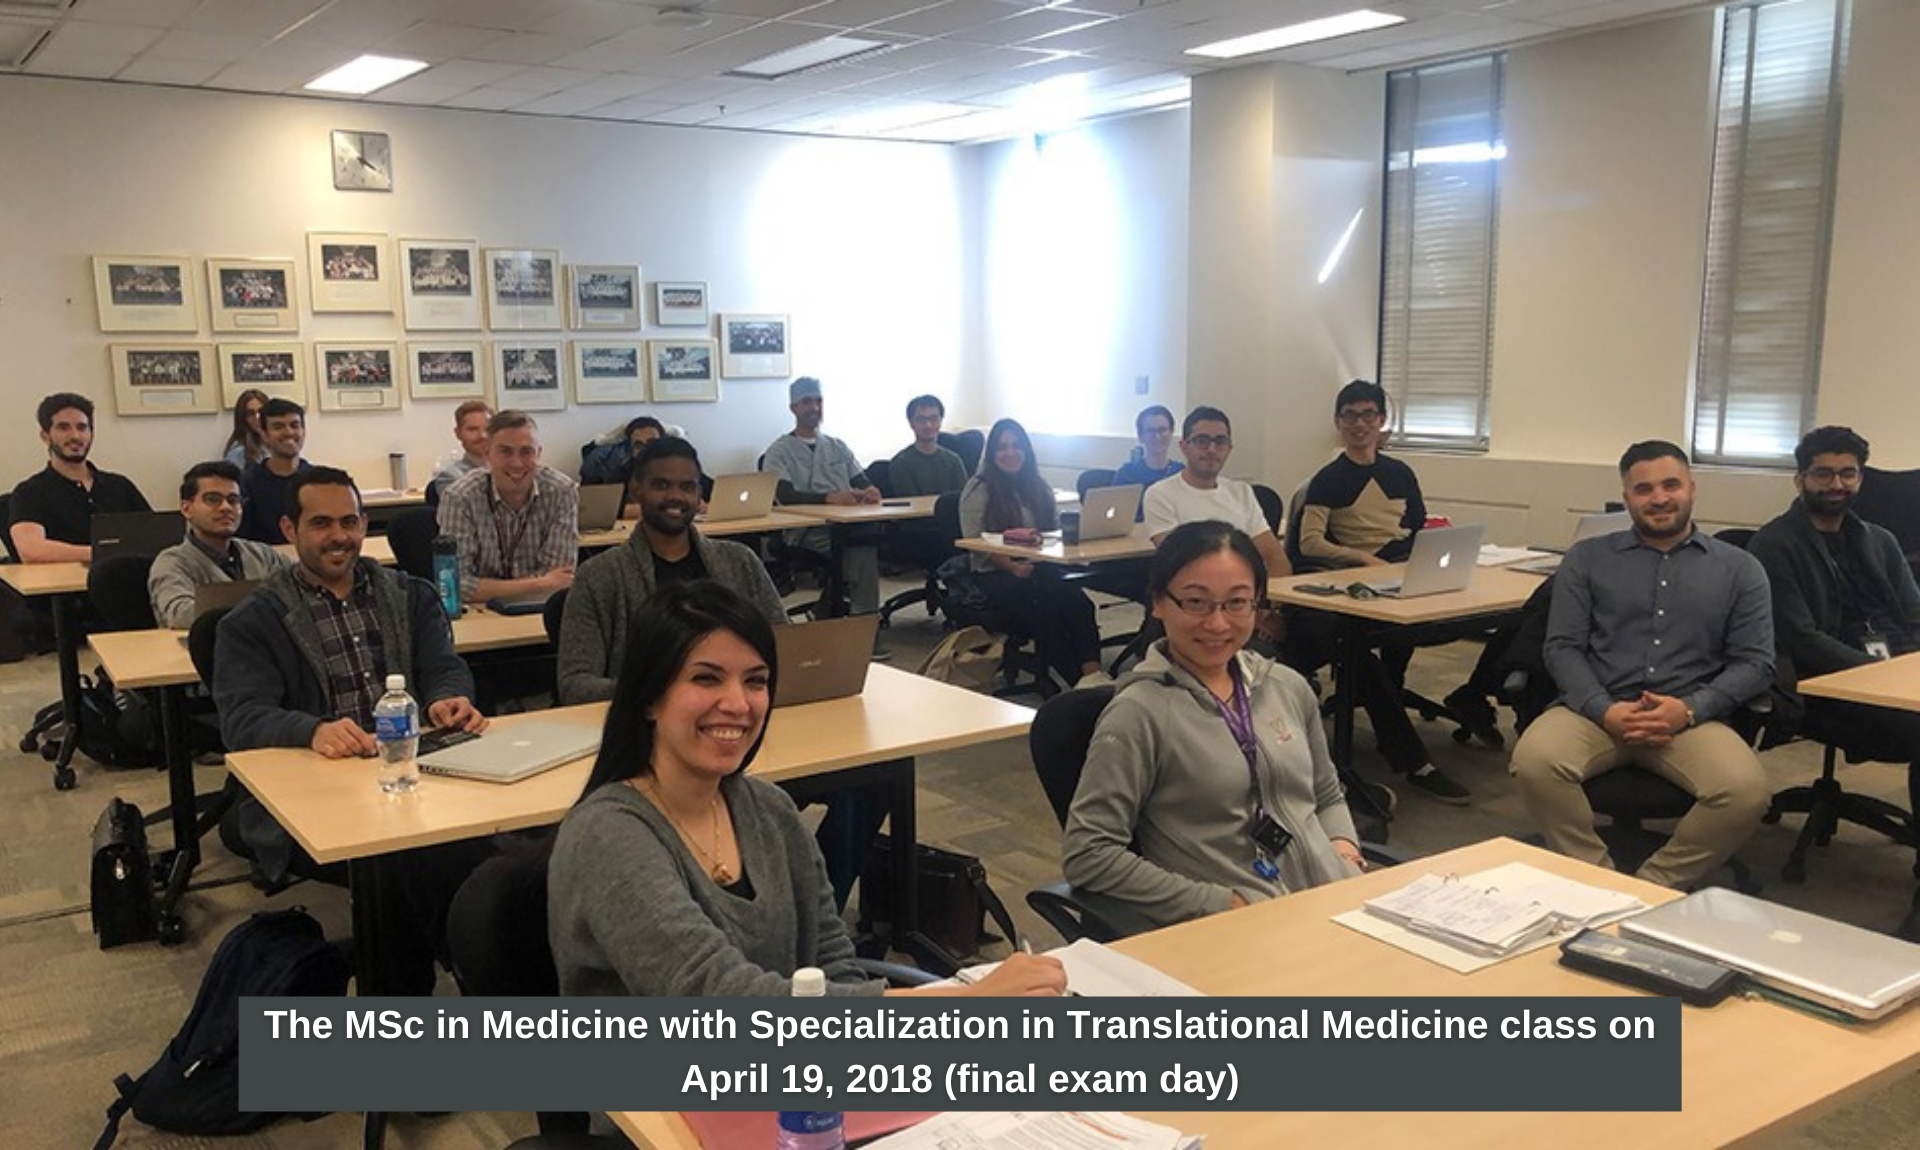 The MSc in Medicine with Specialization in Translational Medicine class on April 19, 2018 (final exam day)